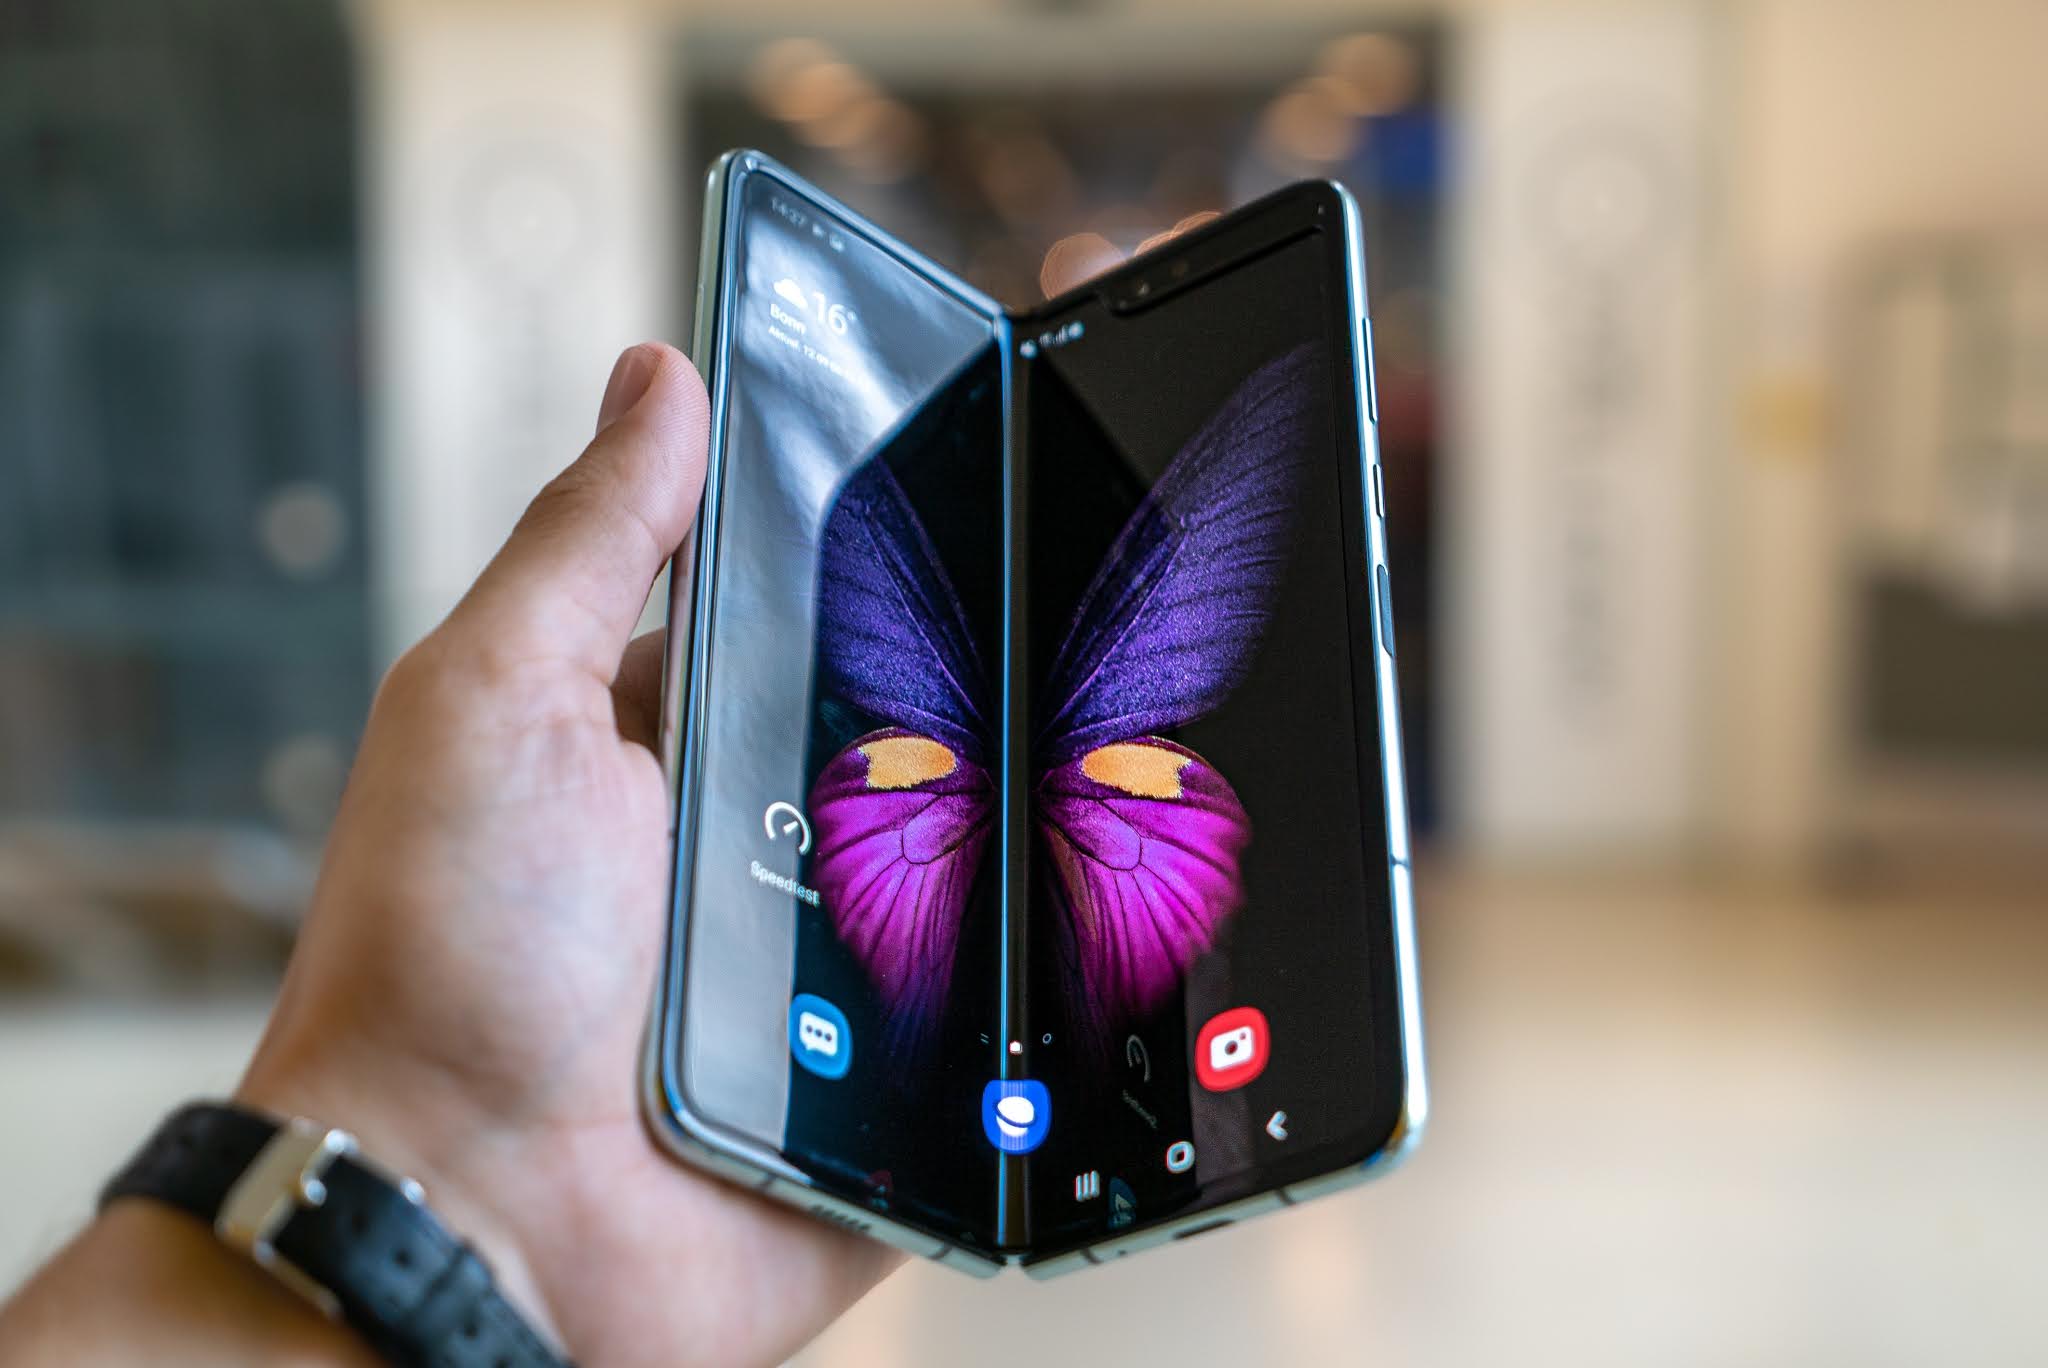 Samsung Galaxy Z Fold 3 price | Samsung Galaxy Z Fold 3 release date | When did the Samsung Z fold 3 come out?